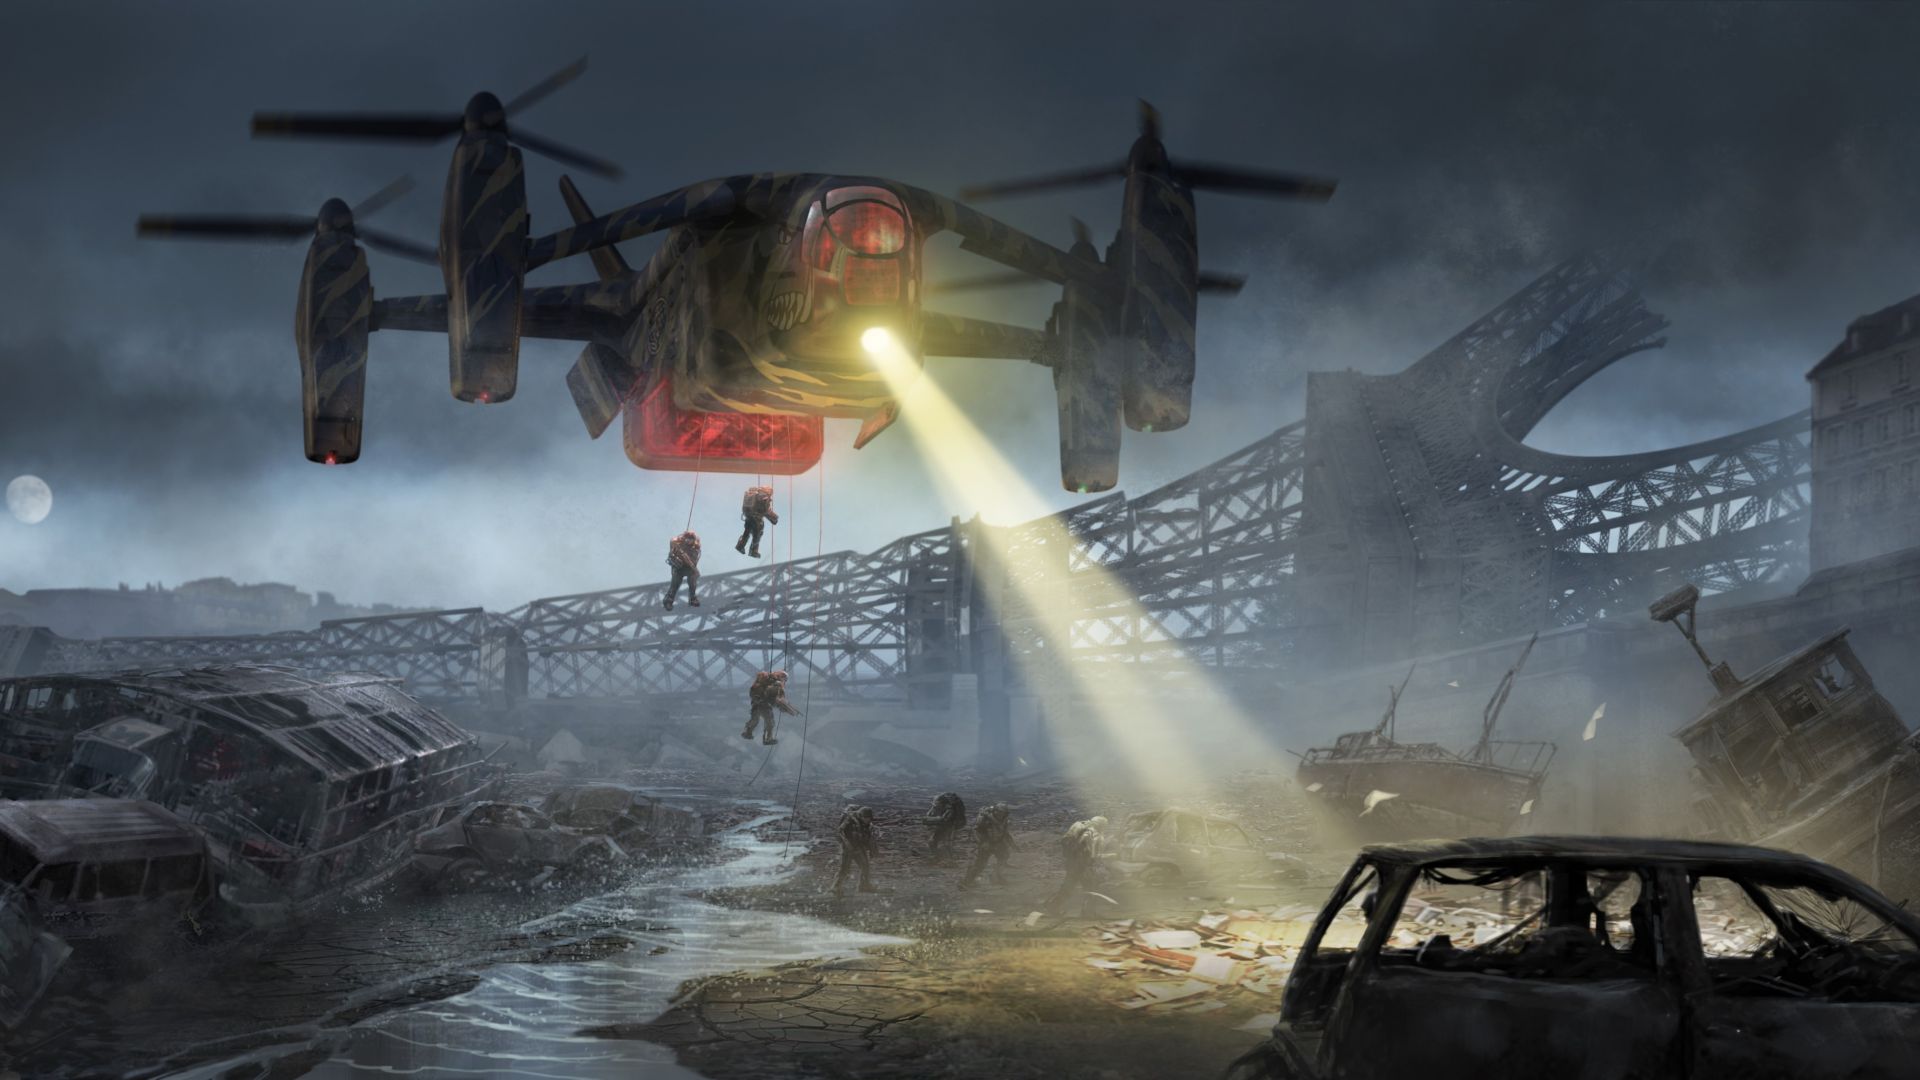 Wallpaper Edge of Tomorrow, movie, military, helicopter, artwork, 4k